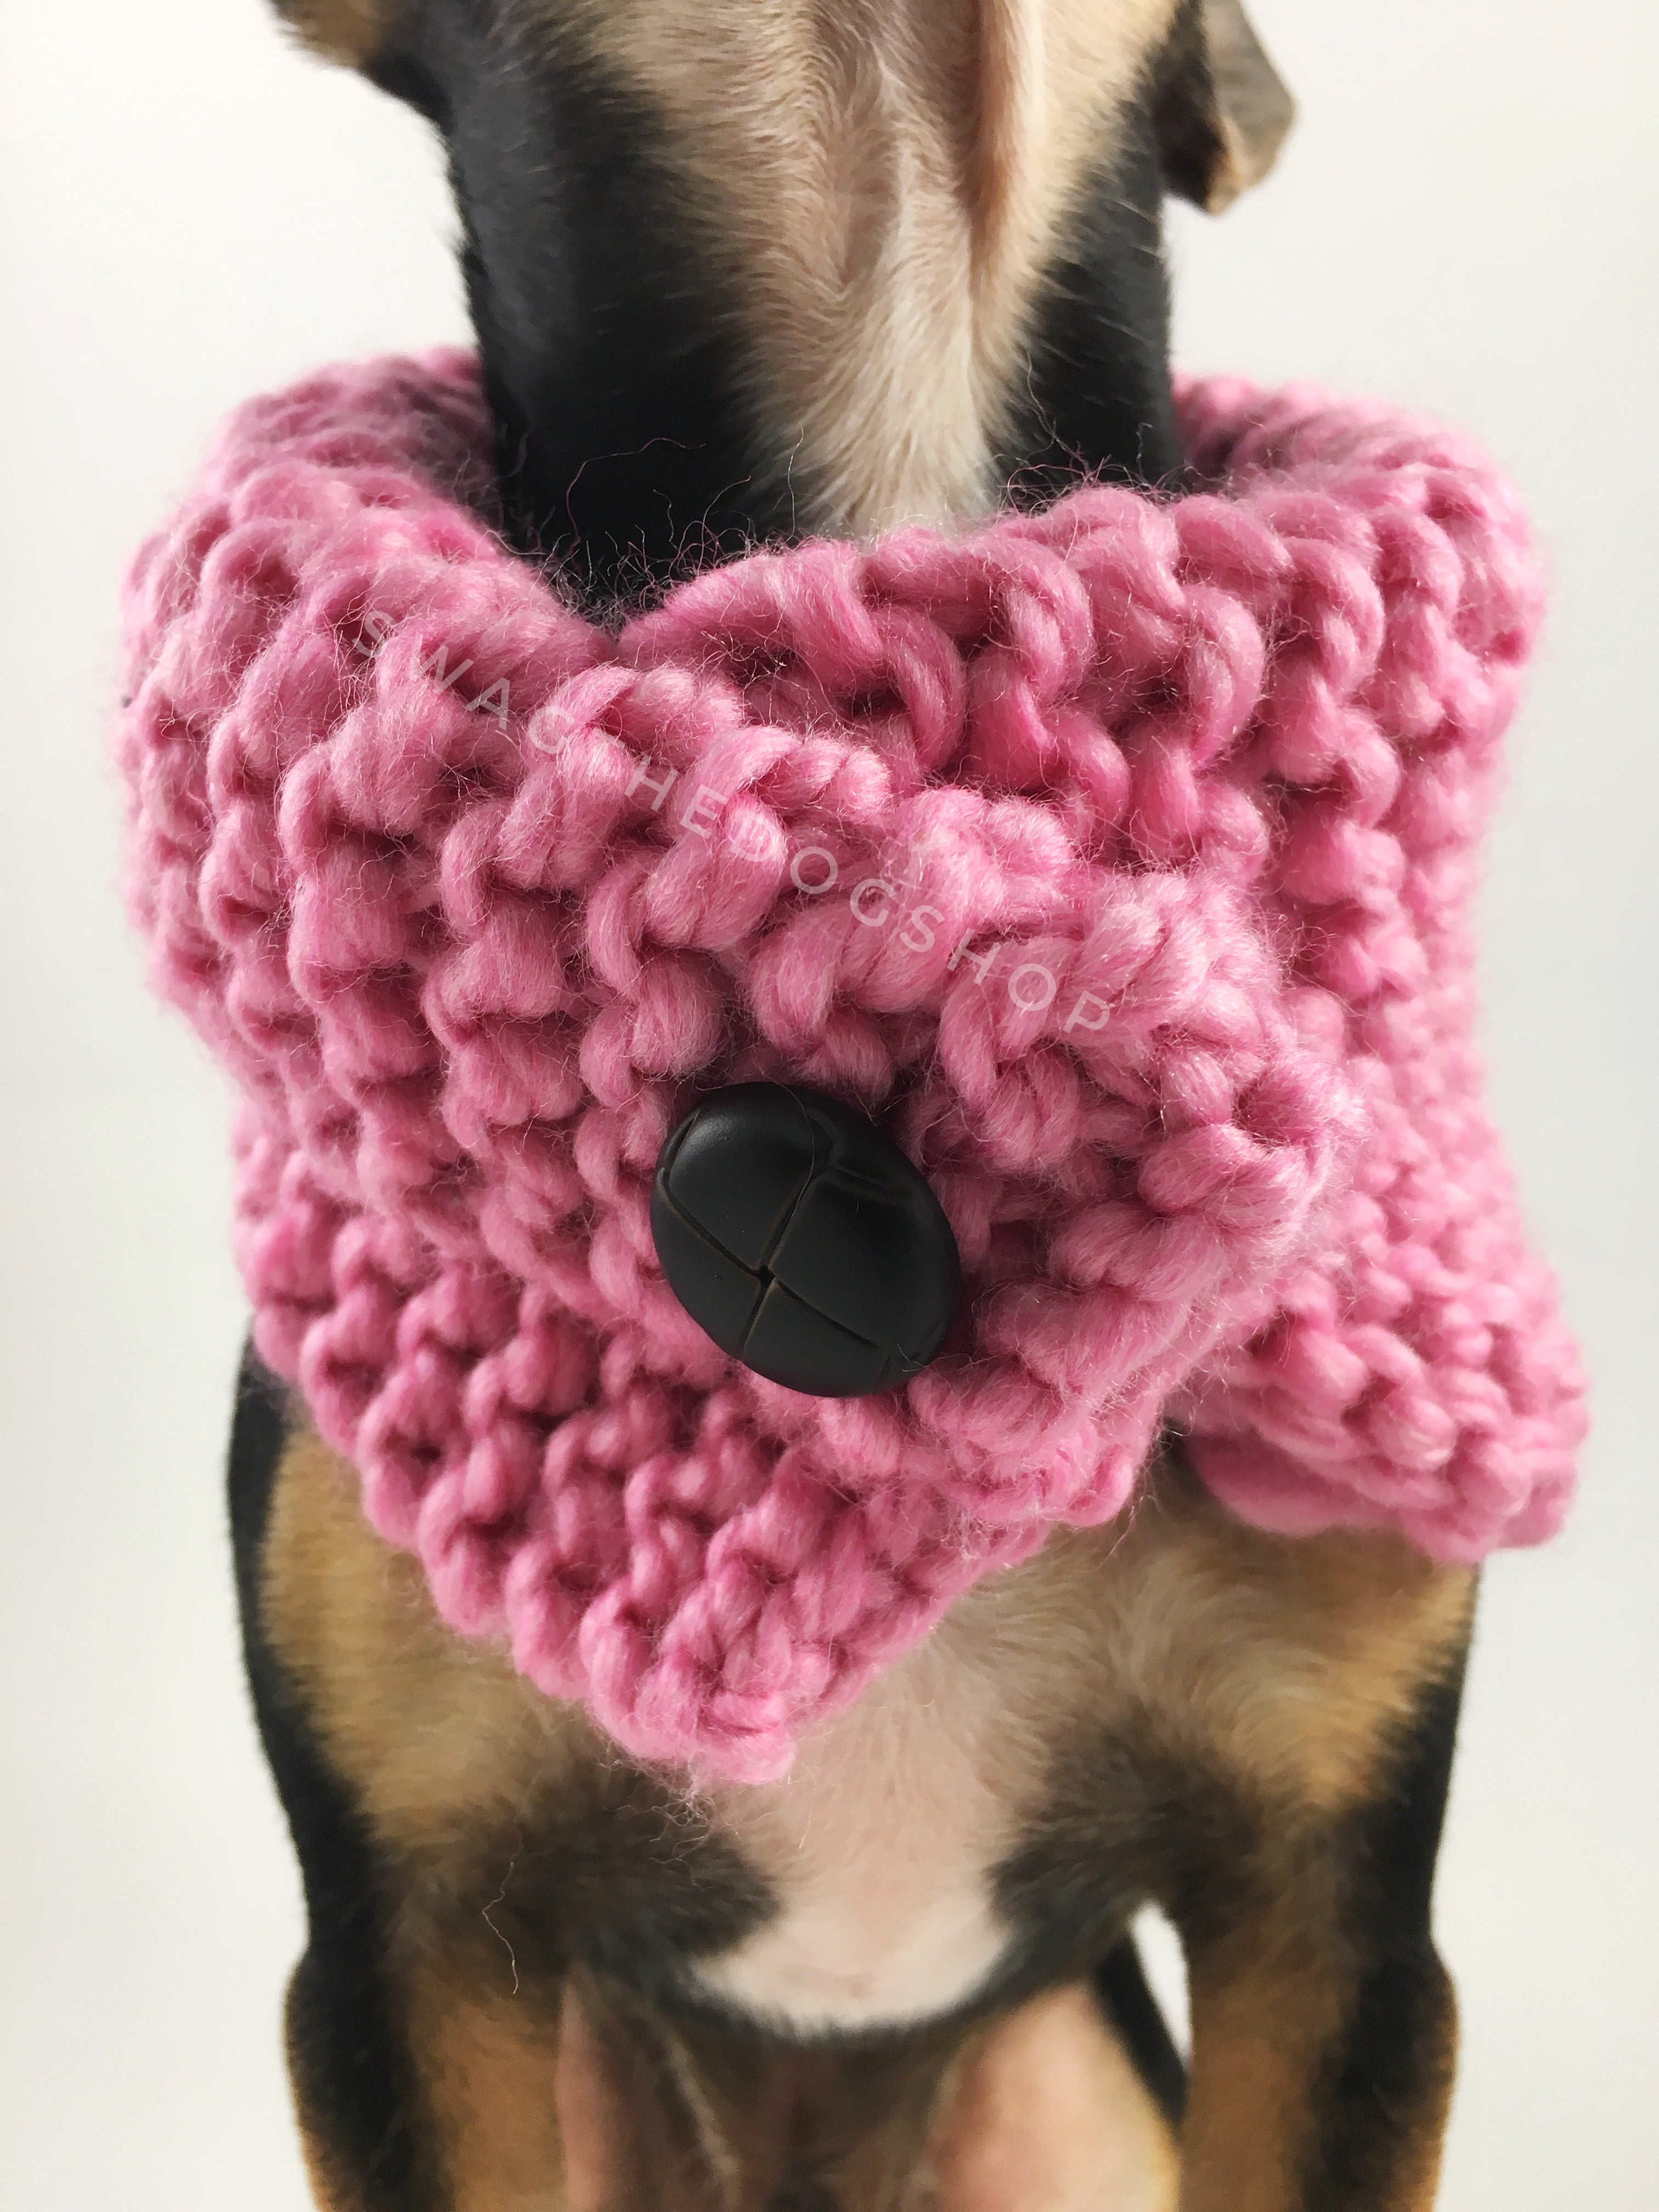 Pink Enough Swagsnood - Close Up Neck View of Cute Chihuahua Dog Wearing Pink Color Dog Snood with Accent Button